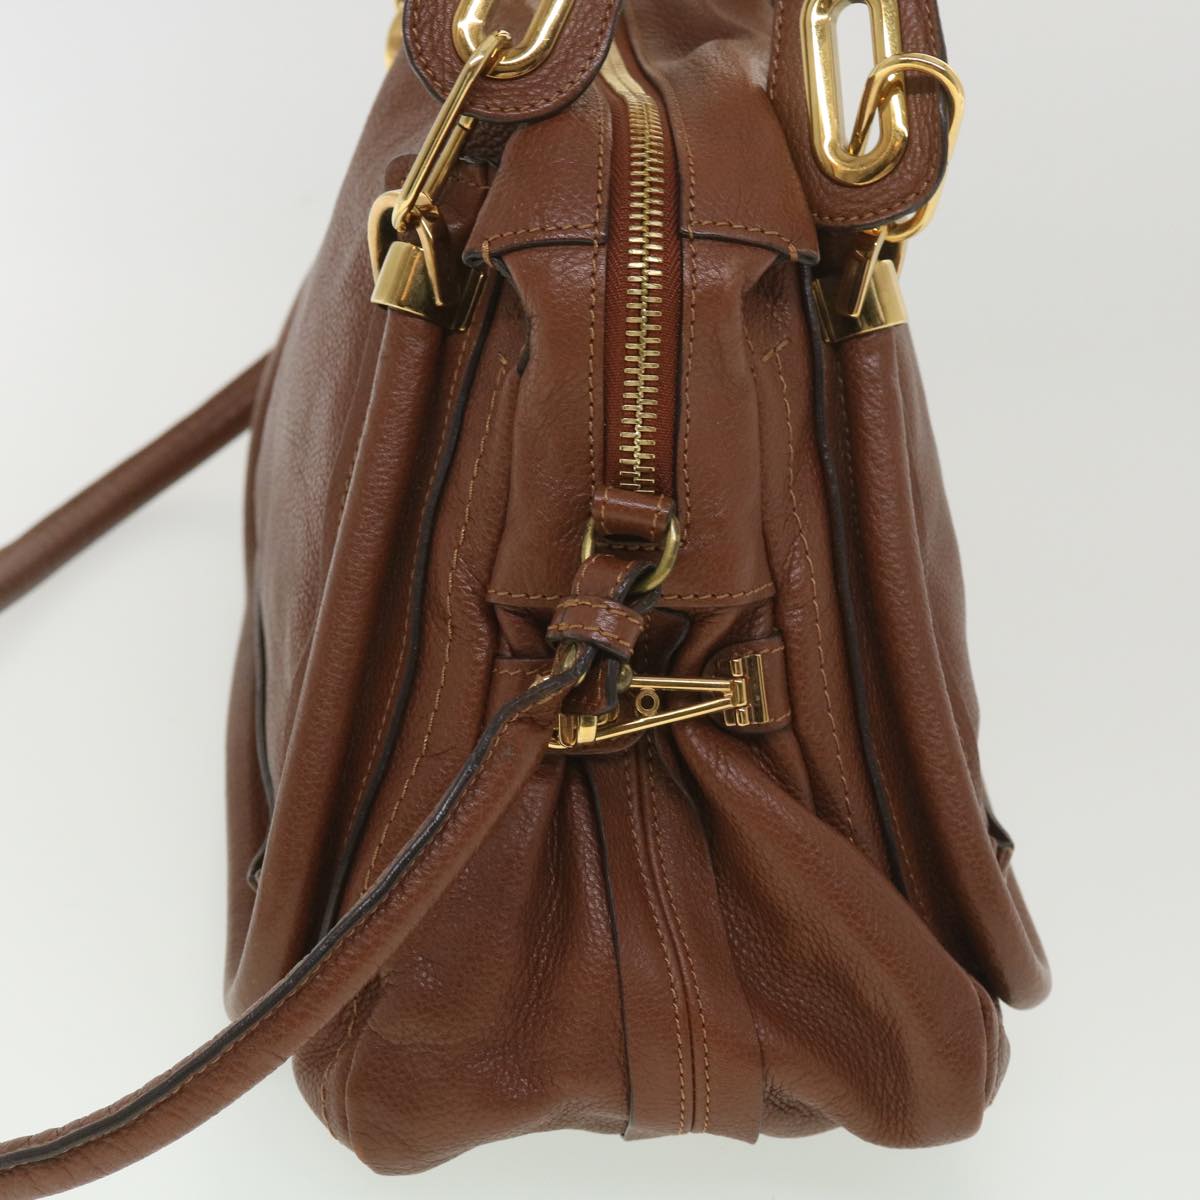 Chloe Paraty Hand Bag Leather 2way Brown Auth 37965